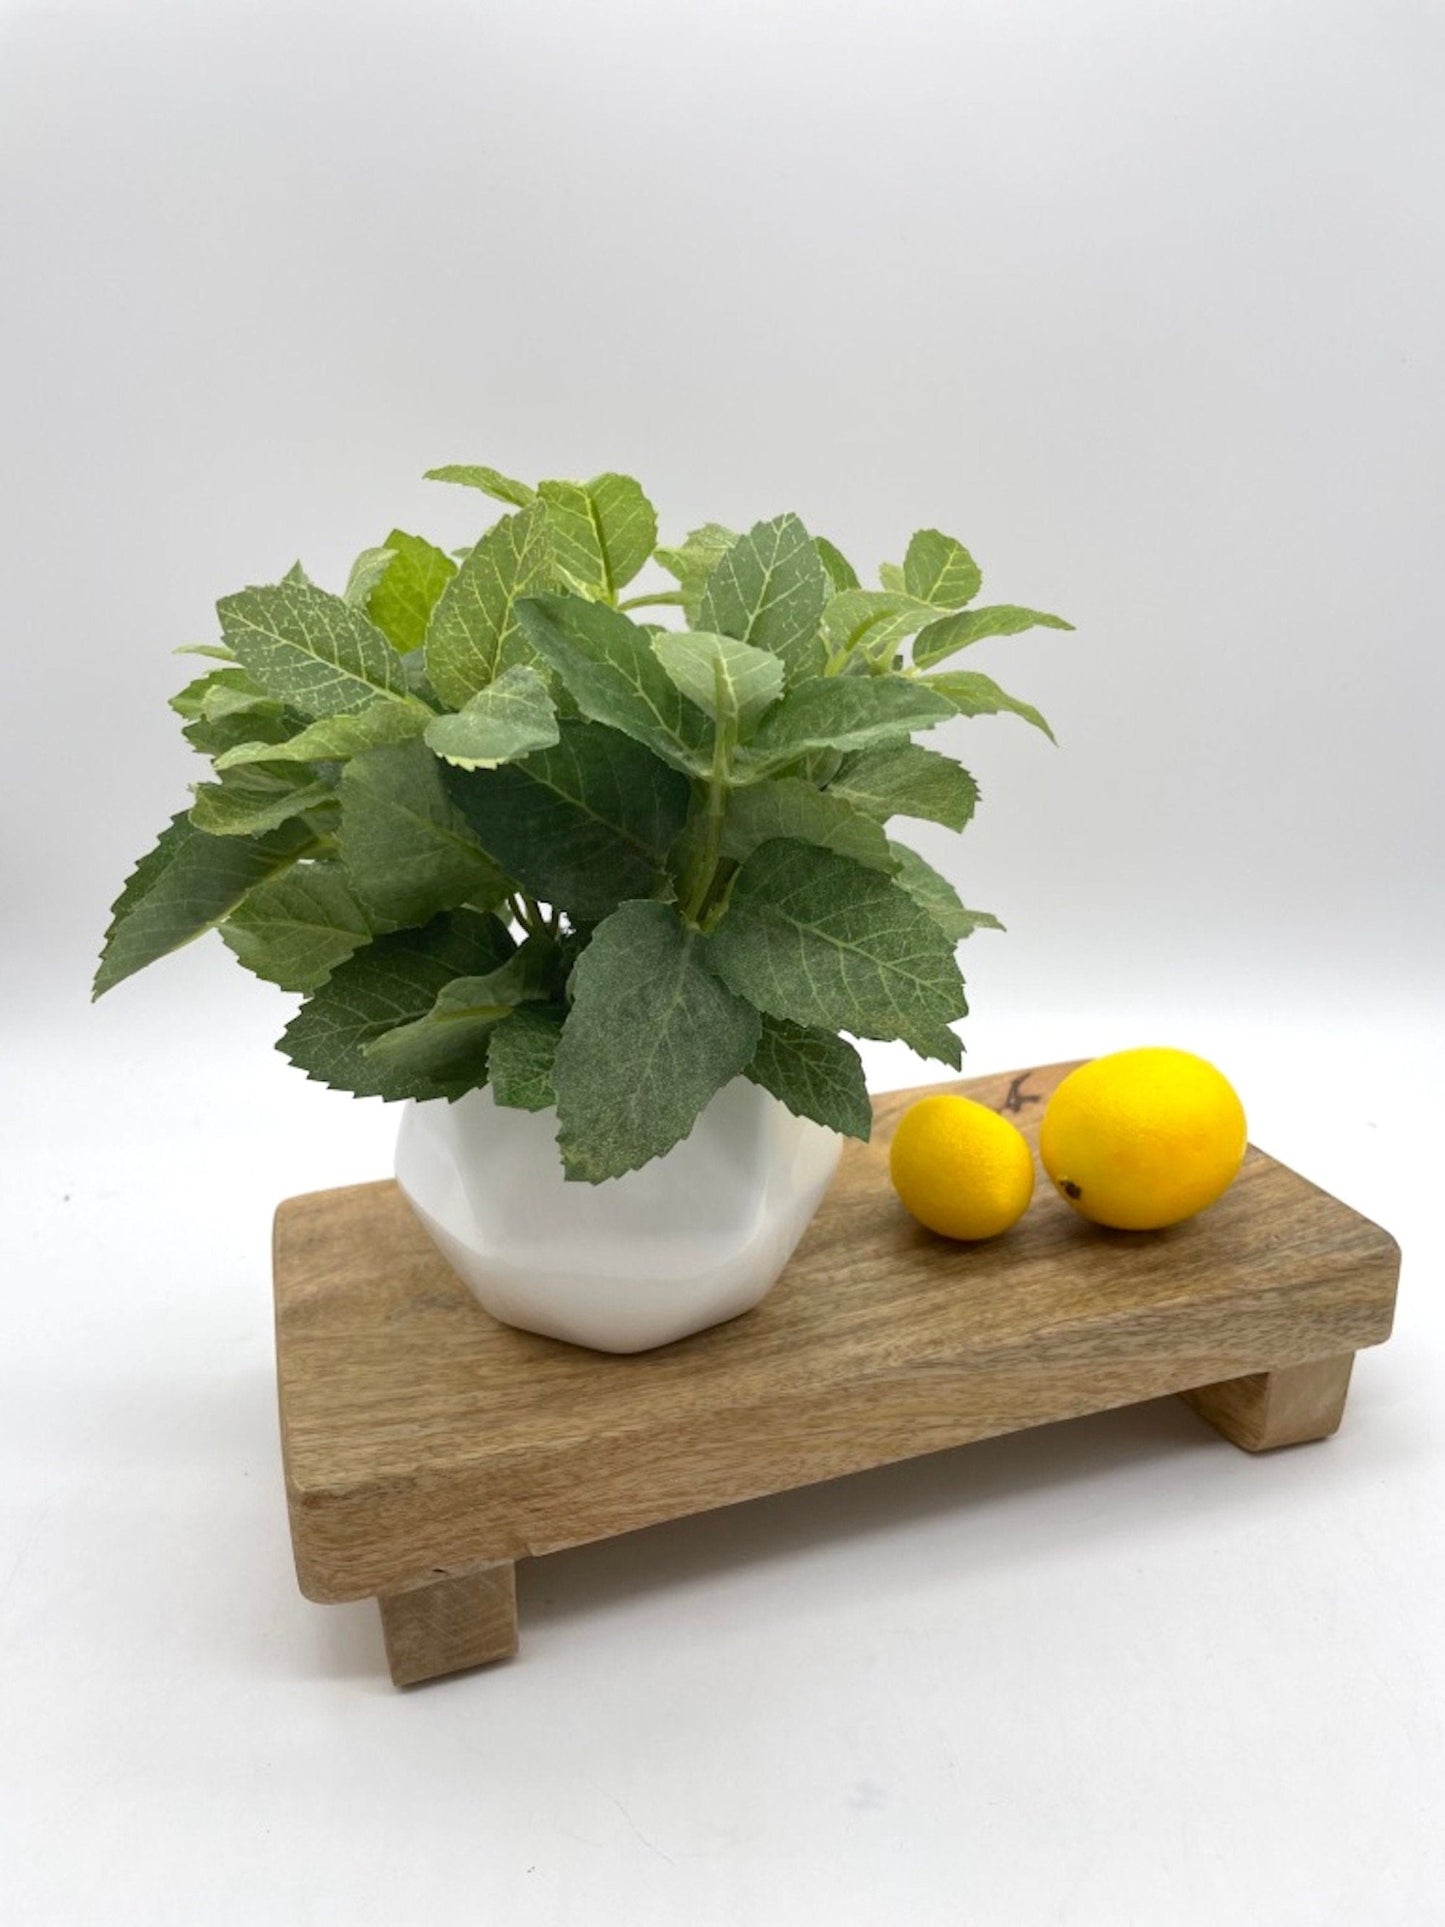 Faux Mint in Small Ceramic Vase, Potted Herb Plants for Kitchen Shelf